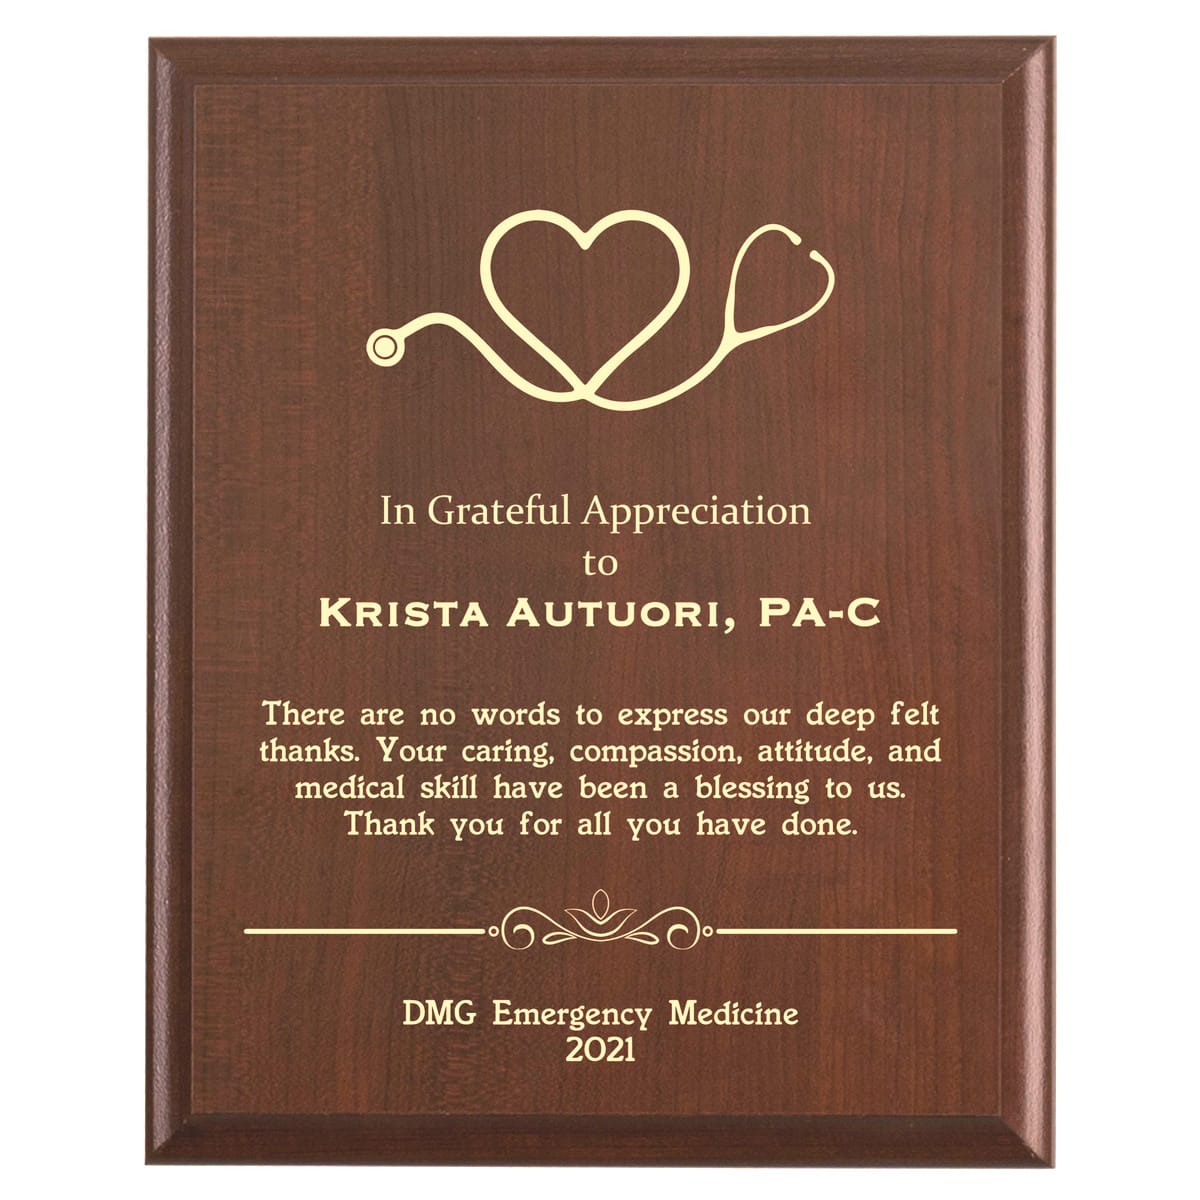 Plaque photo: Nurse Thank You Appreciation Plaque design with free personalization. Wood style finish with customized text.